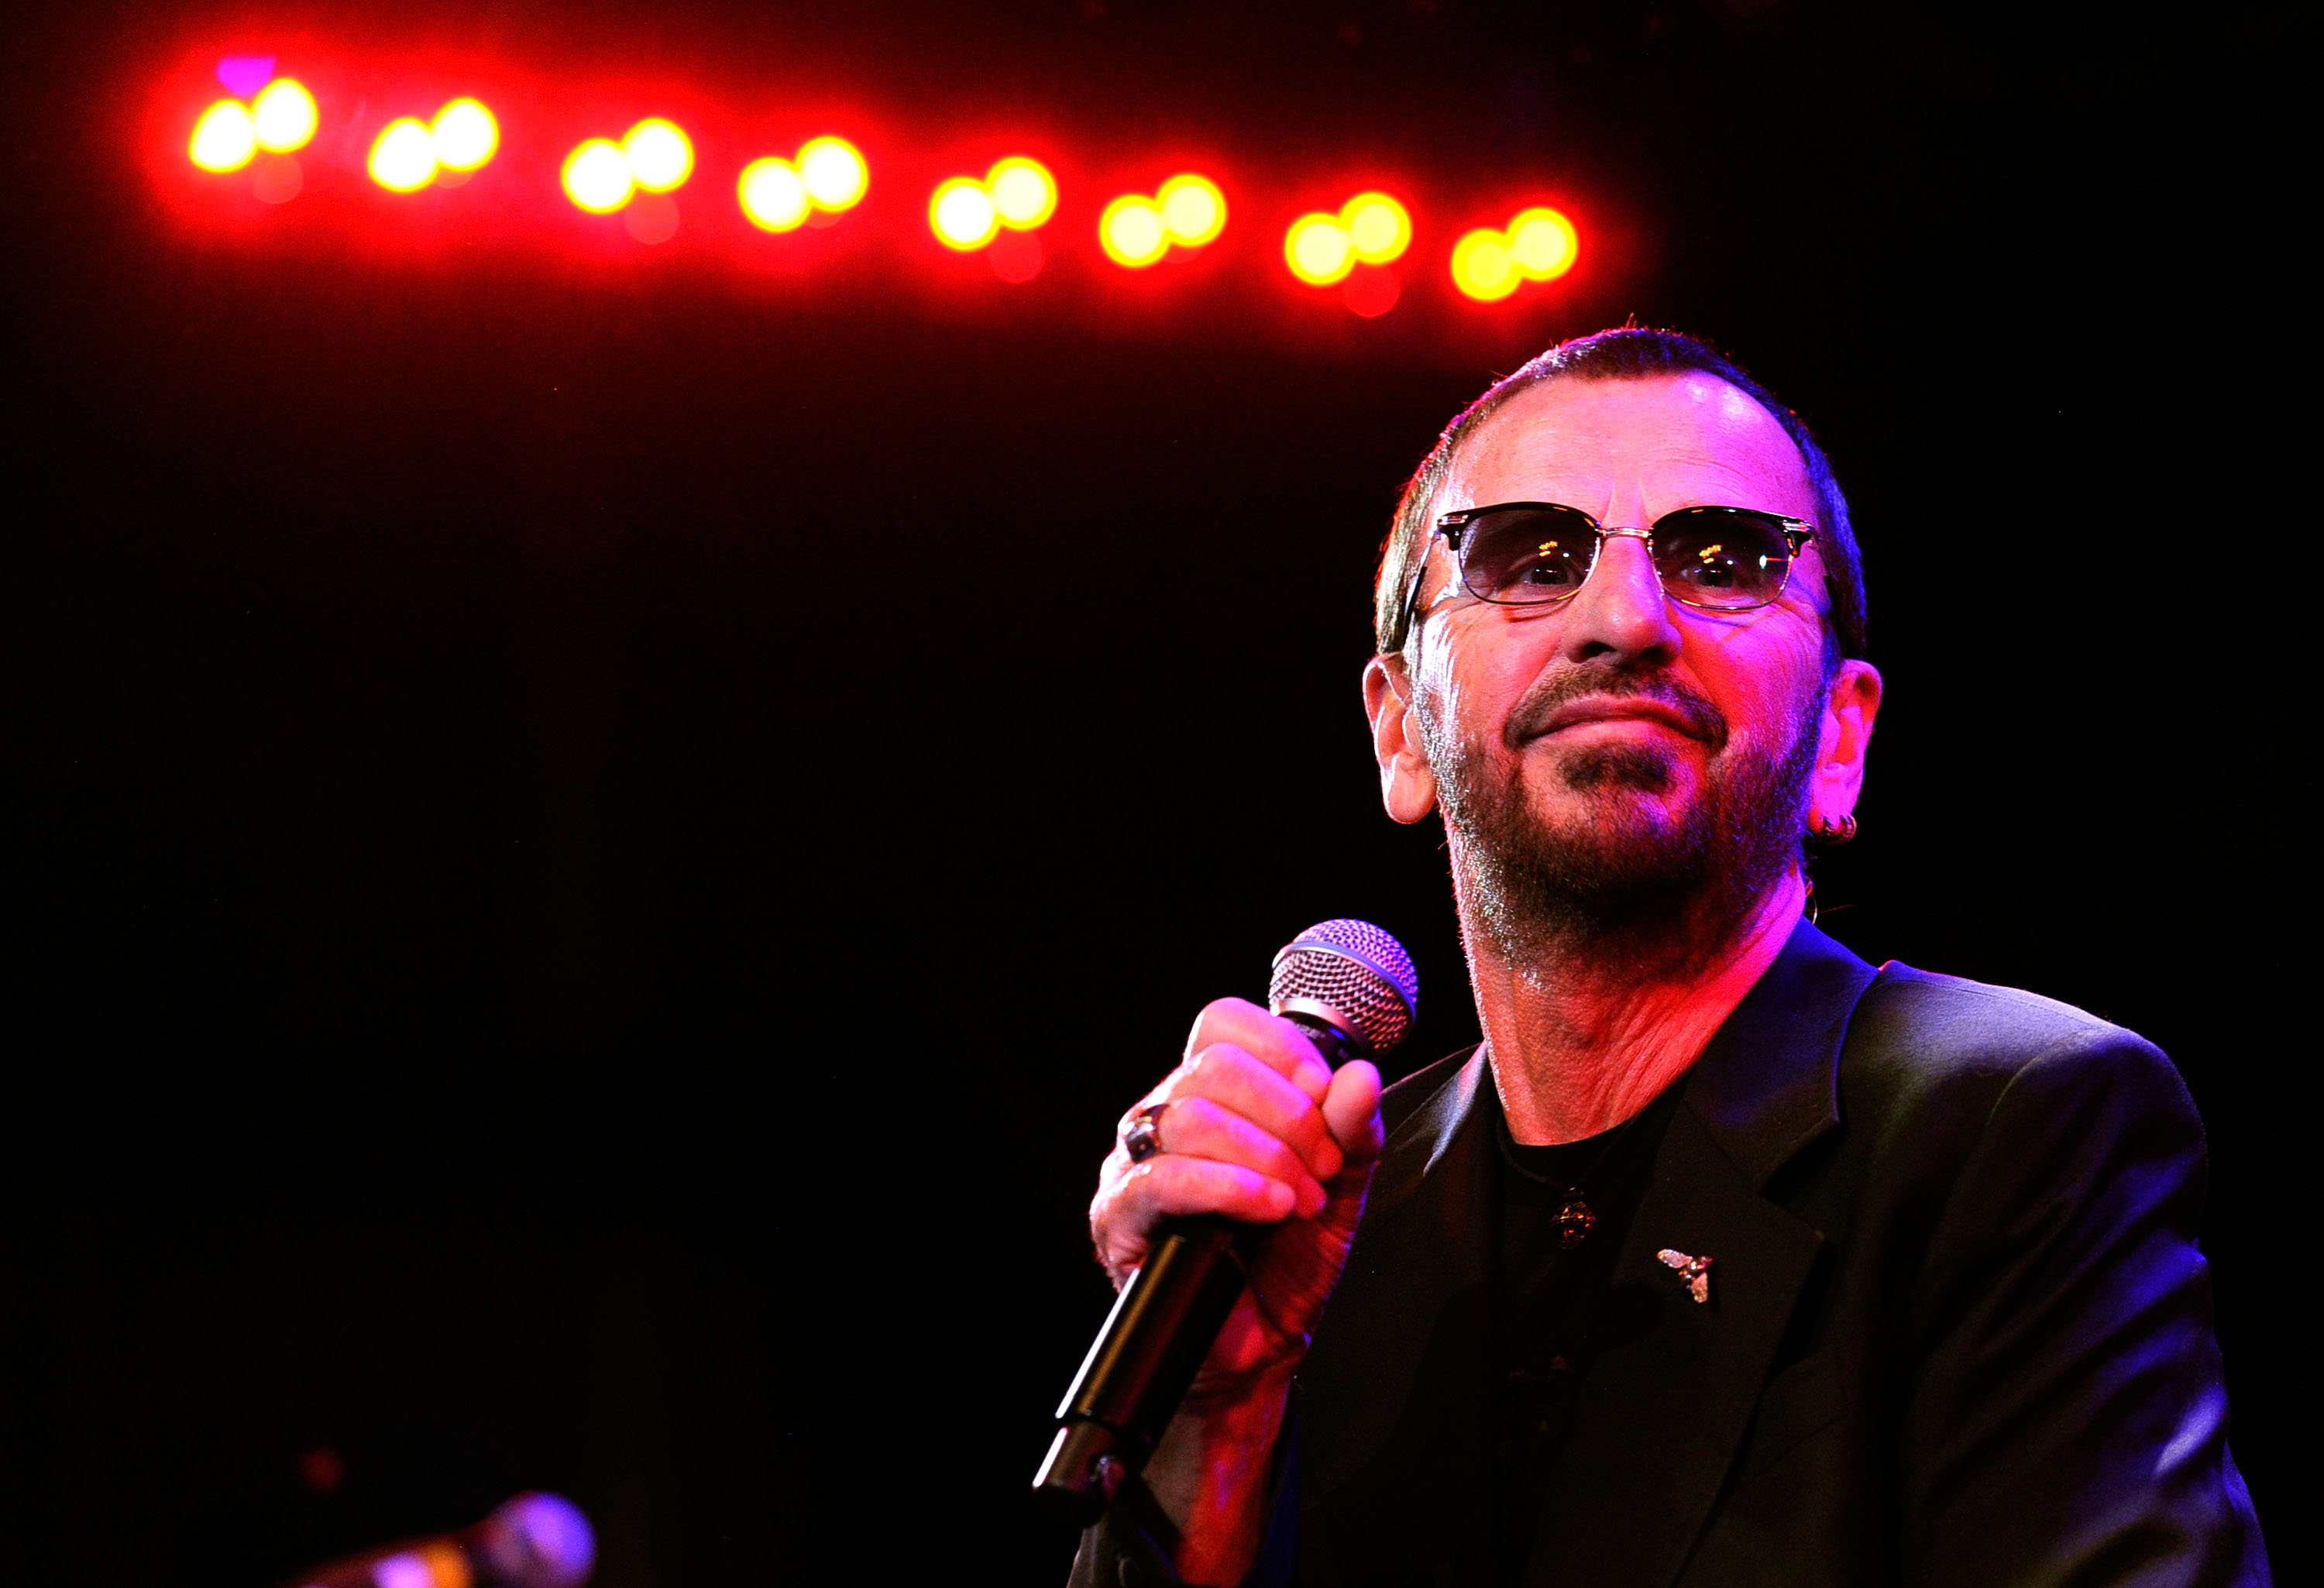 Ringo Starr wears sunglasses and holds a microphone.